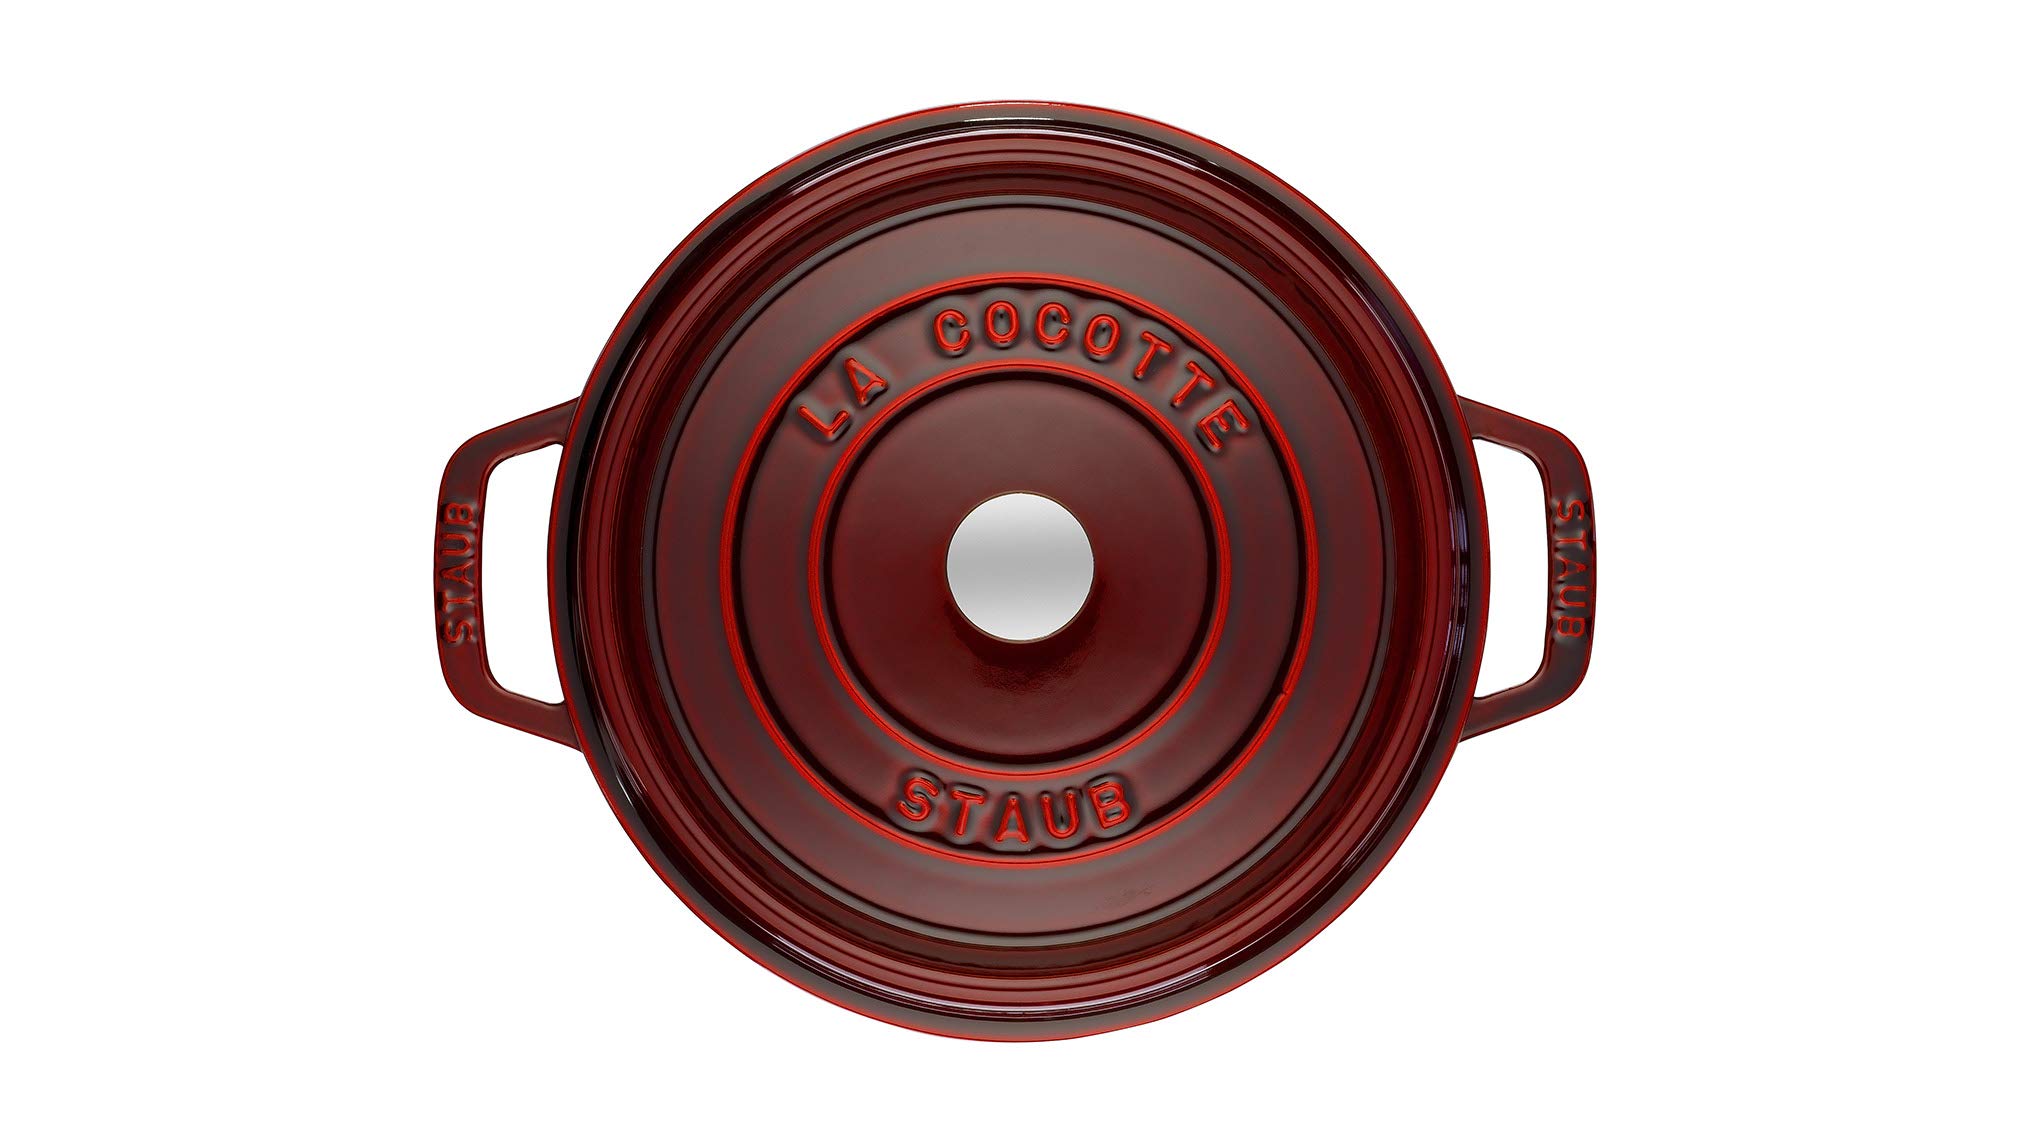 Staub Cast Iron 7-qt Round Cocotte - Grenadine, Made in France